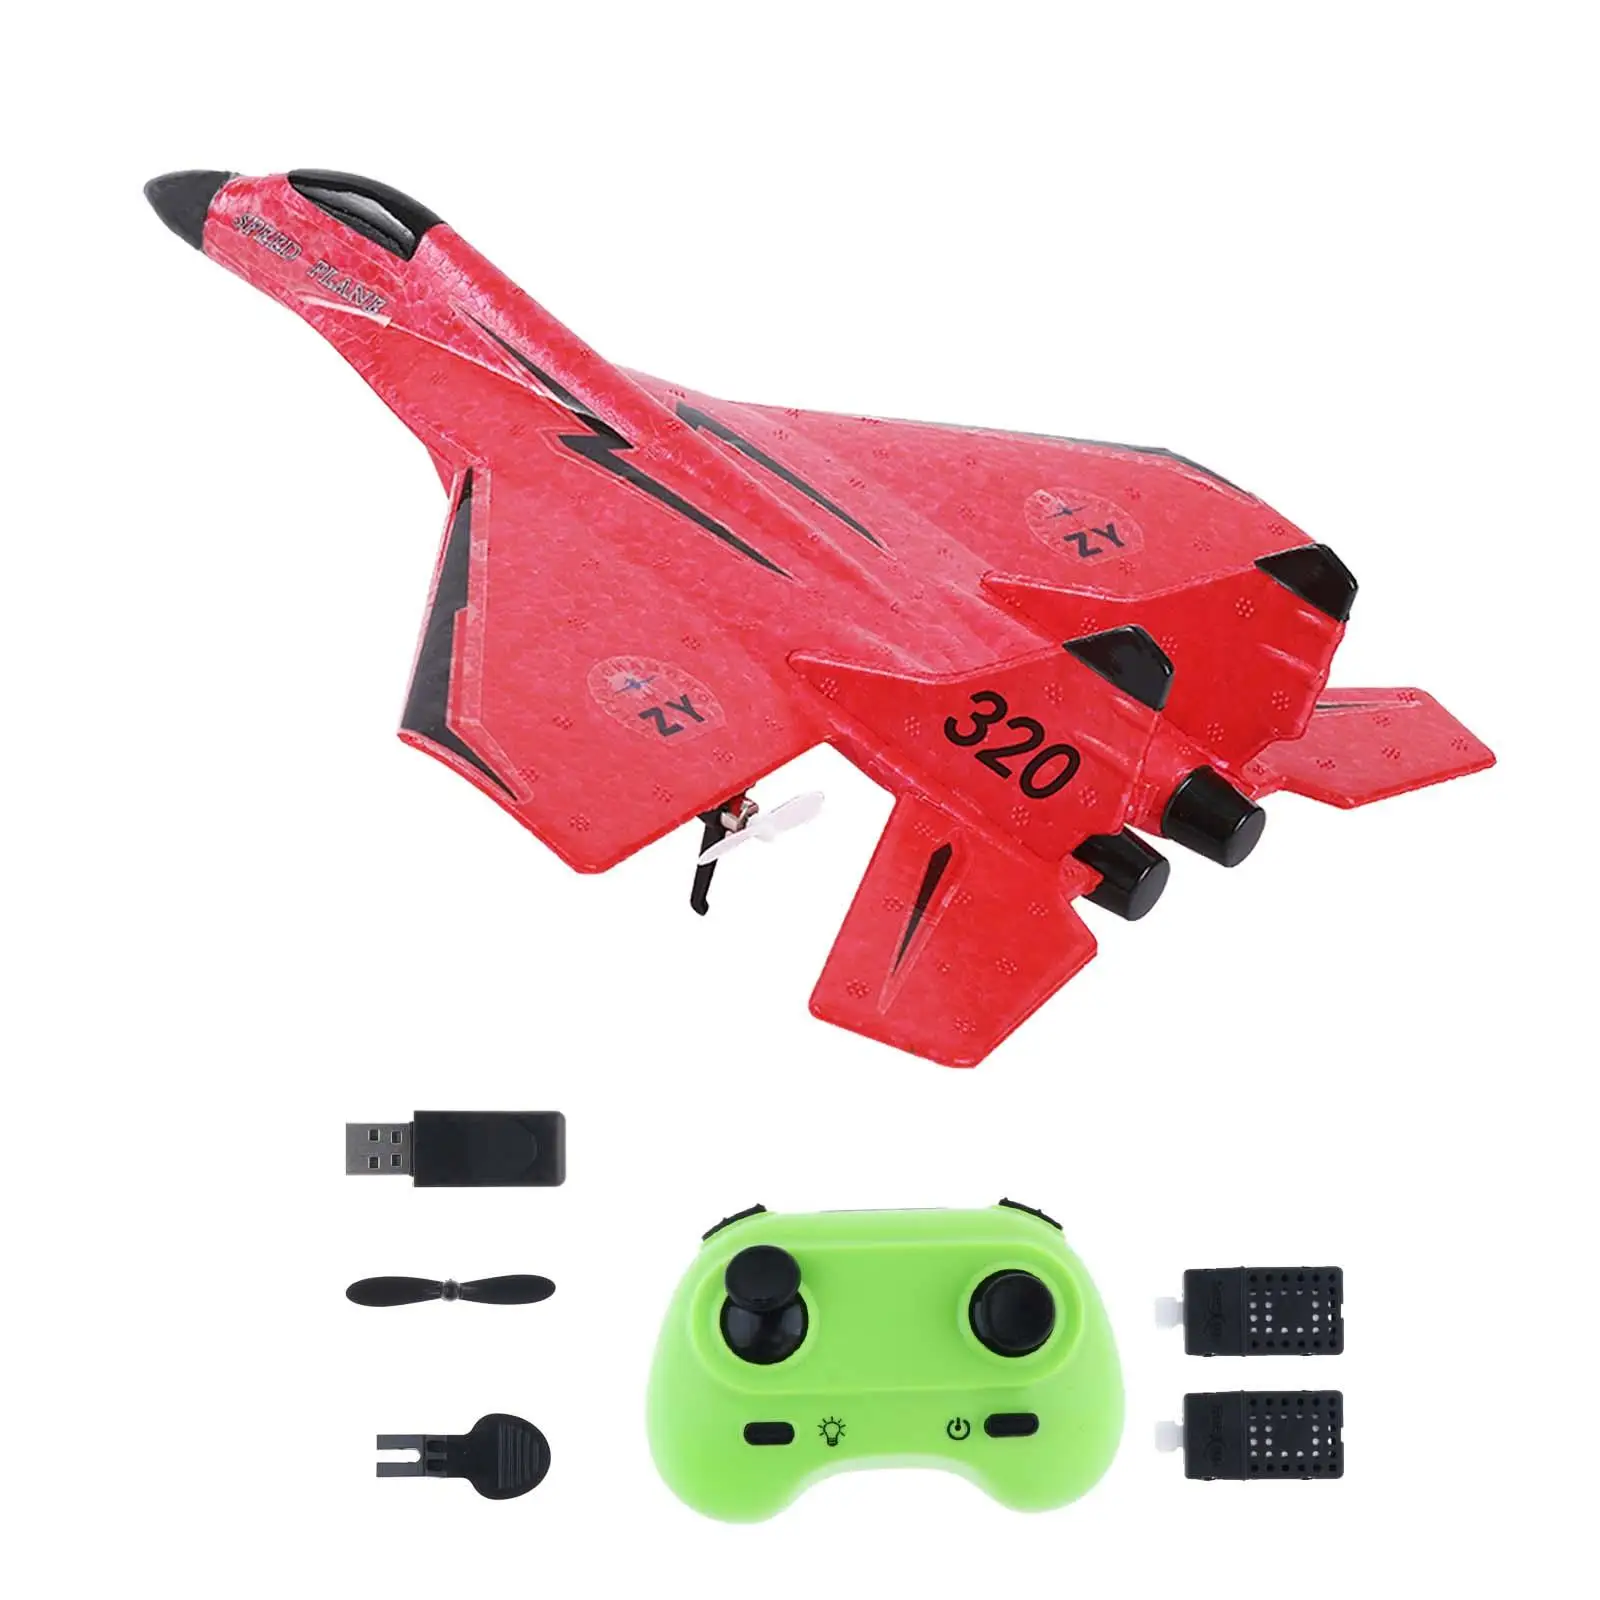 RC Plane Lightweight Easy to Fly Gift with LED Cool Light 2.4G 2 Channel RC Glider Jet Fighter Toy Aircraft Model for Adults